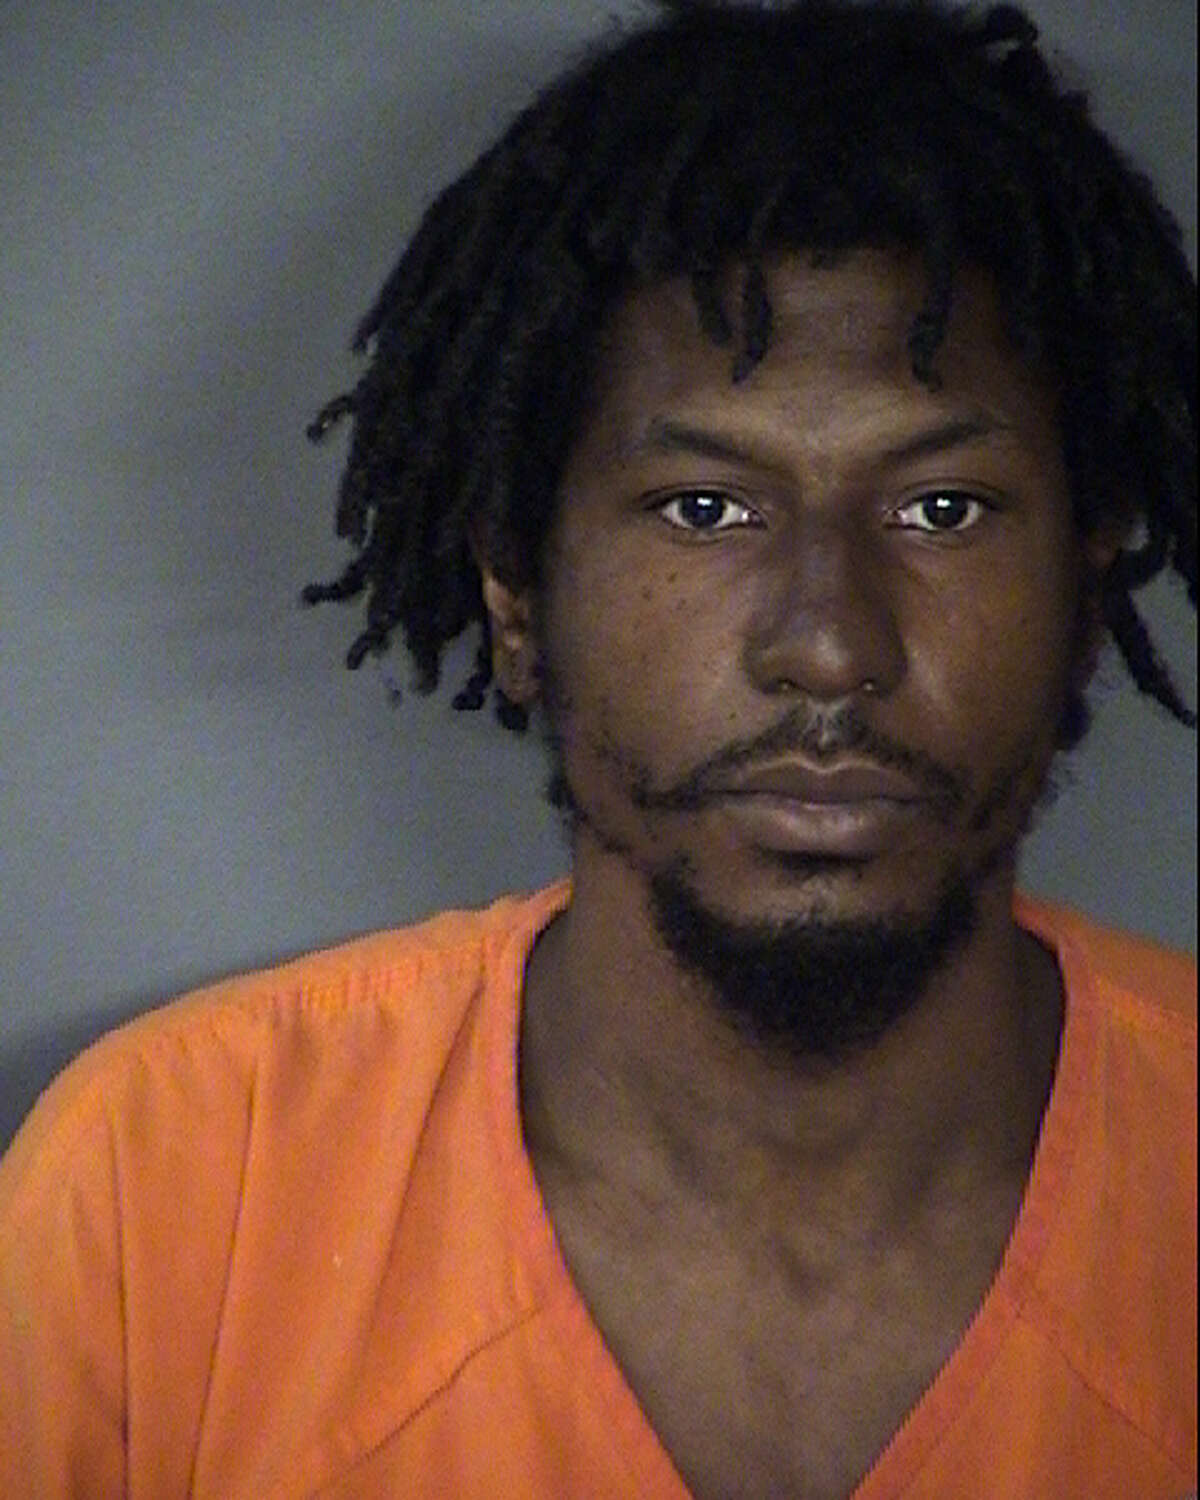 The suspect in the stomping attack, Shandrick Van Anthony Buckley, now faces a murder charge in connection with the death of 55-year-old Jose Gustavo Hernandez, who was found around 11 a.m. on Aug. 9 near the Union Pacific railroad tracks behind the Haven for Hope shelter.